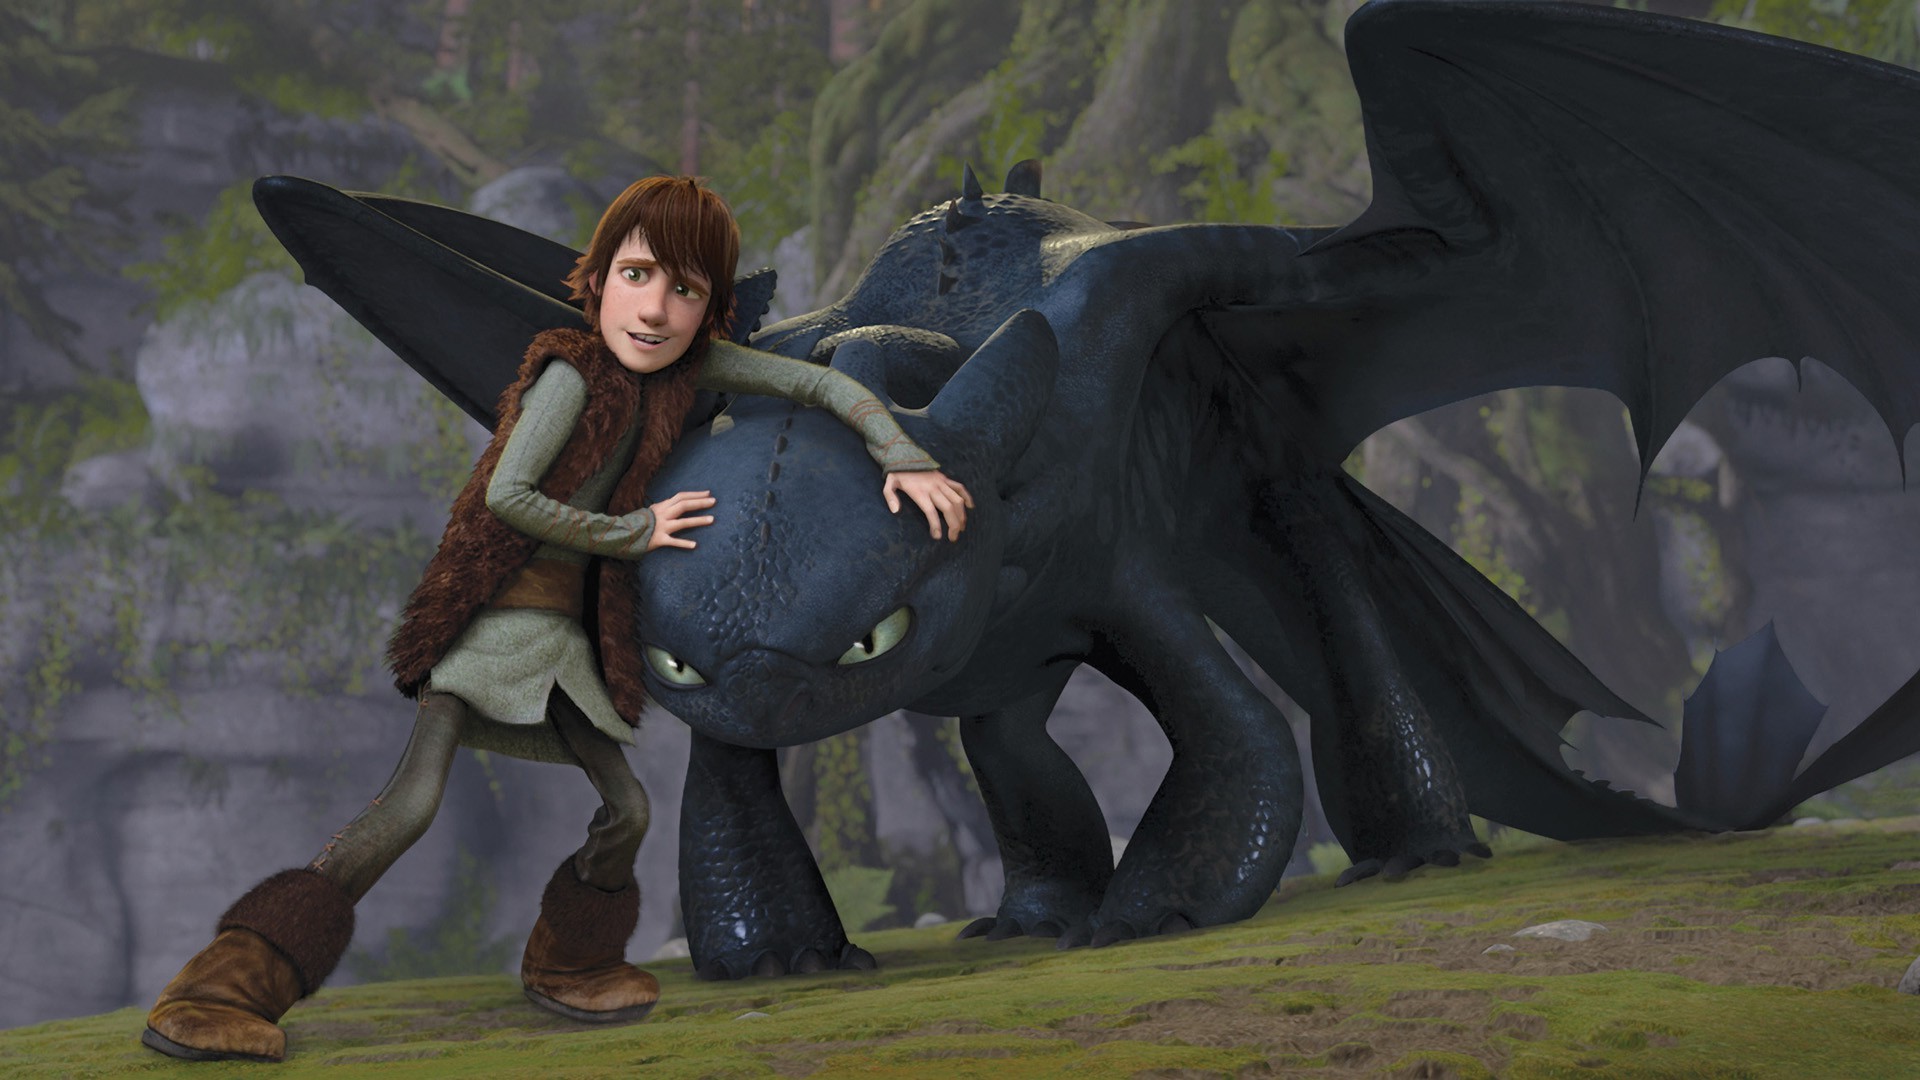 How To Train Your Dragon, Dreamworks, Movies Wallpaper